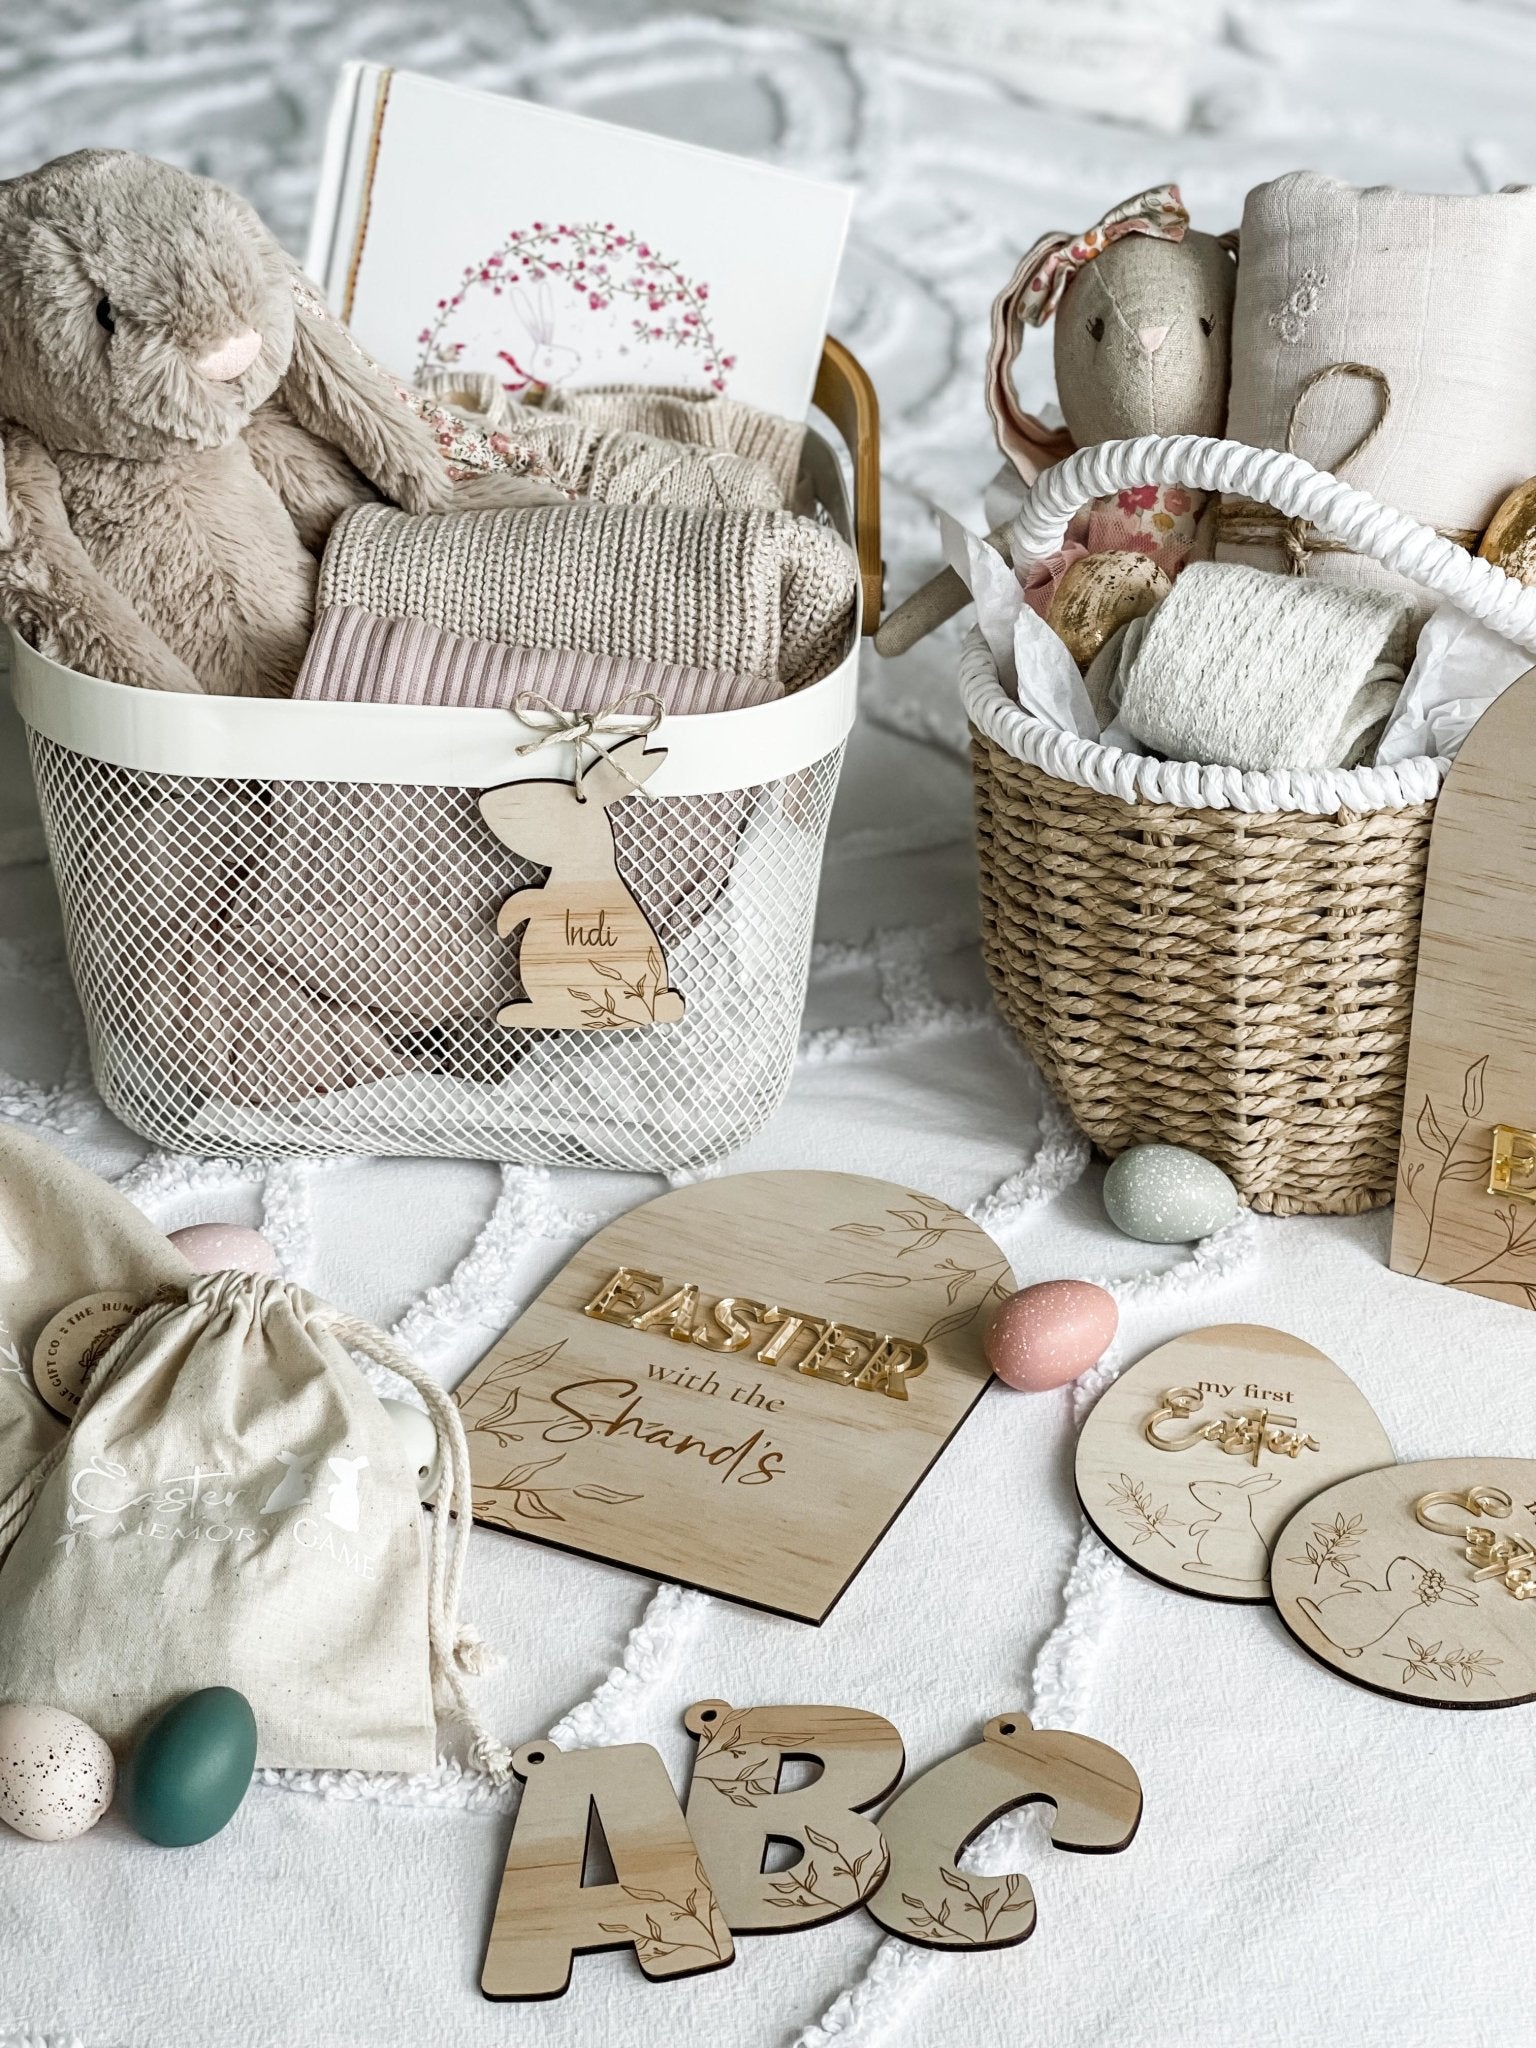 Simple ways to decorate for Easter - The Humble Gift Co.